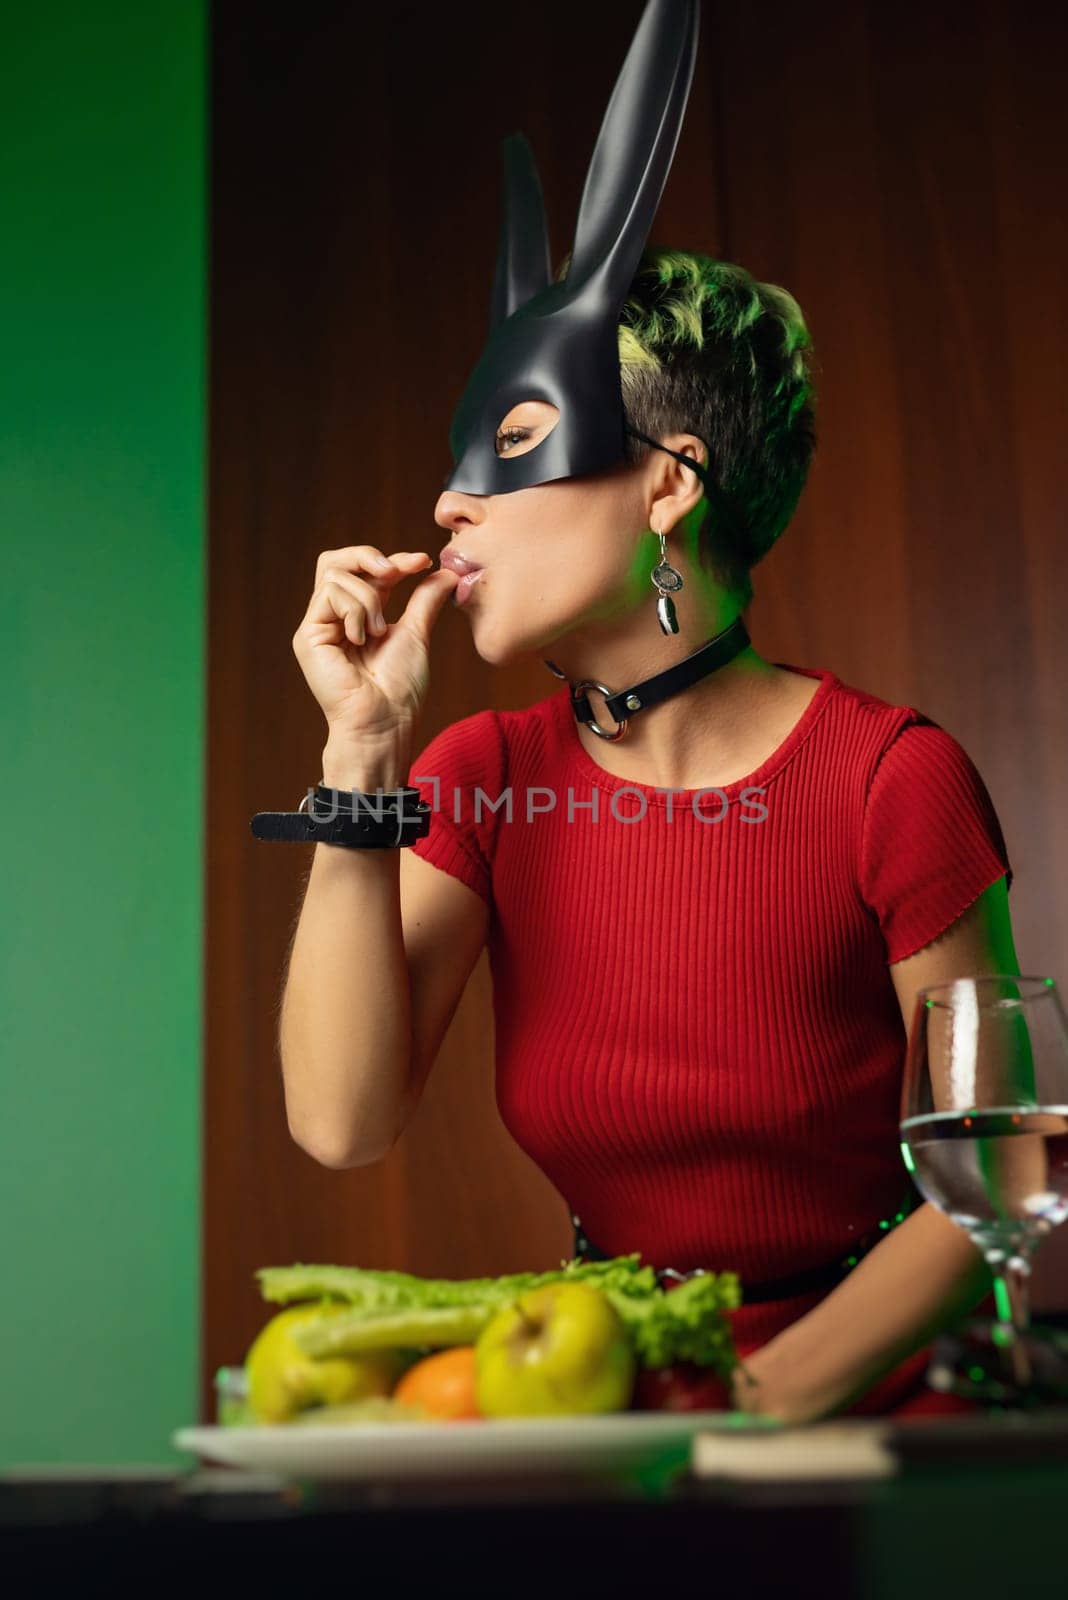 A beautiful girl in a bdsm rabbit mask and a bright red dress eats lettuce leaves promoting a healthy lifestyle and vegetarianism by Rotozey